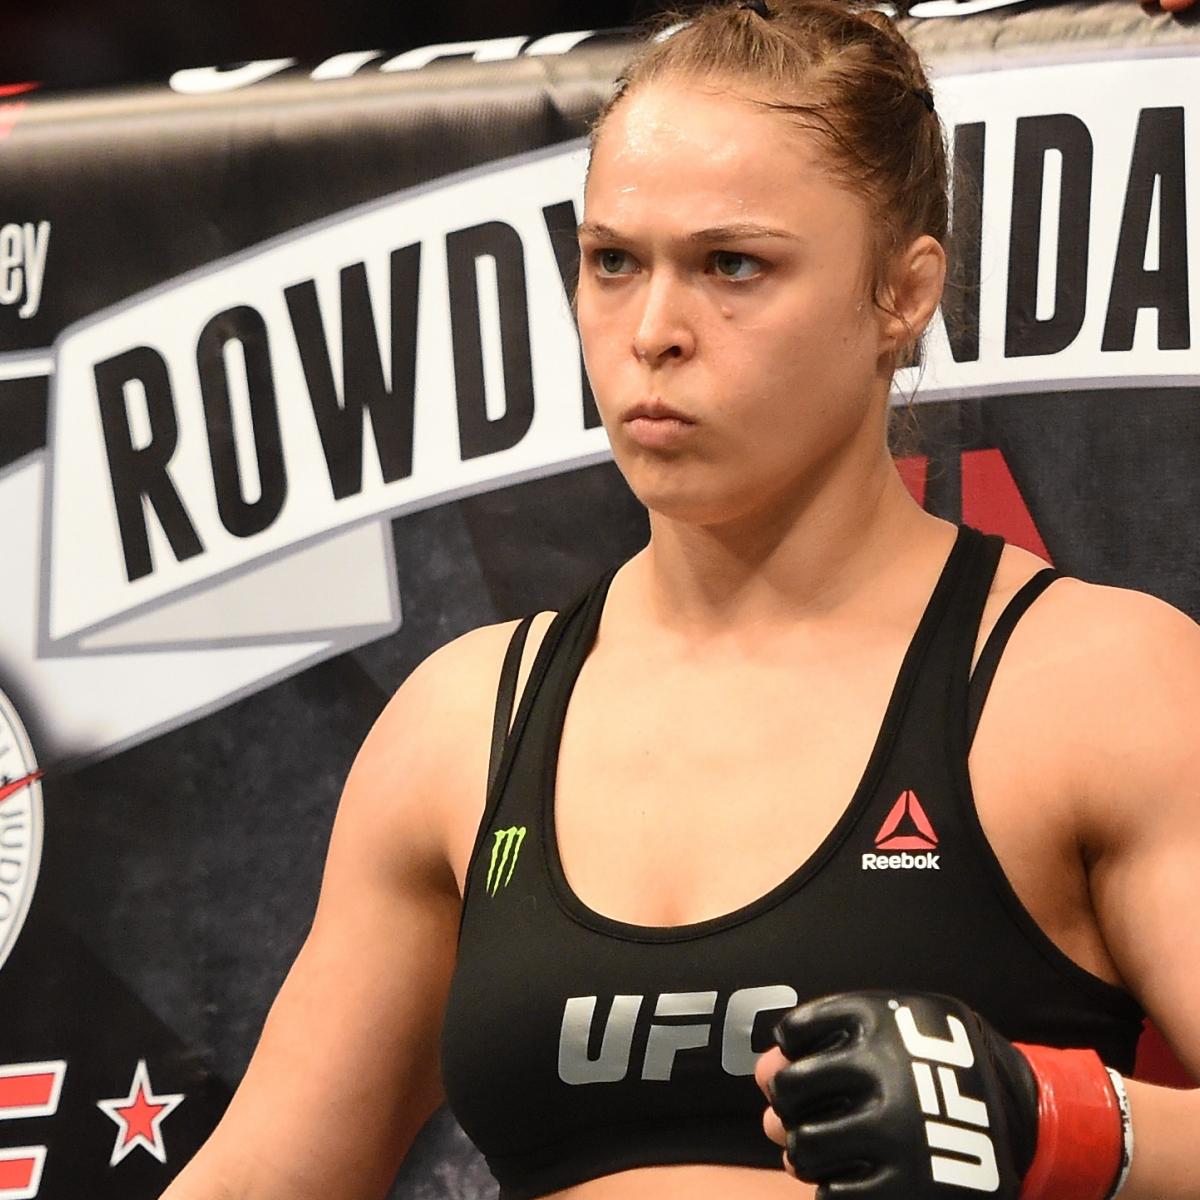 Ronda Rousey Sets Cris Cyborg Timeline for UFC Showdown, Rules Out TUF Rumours